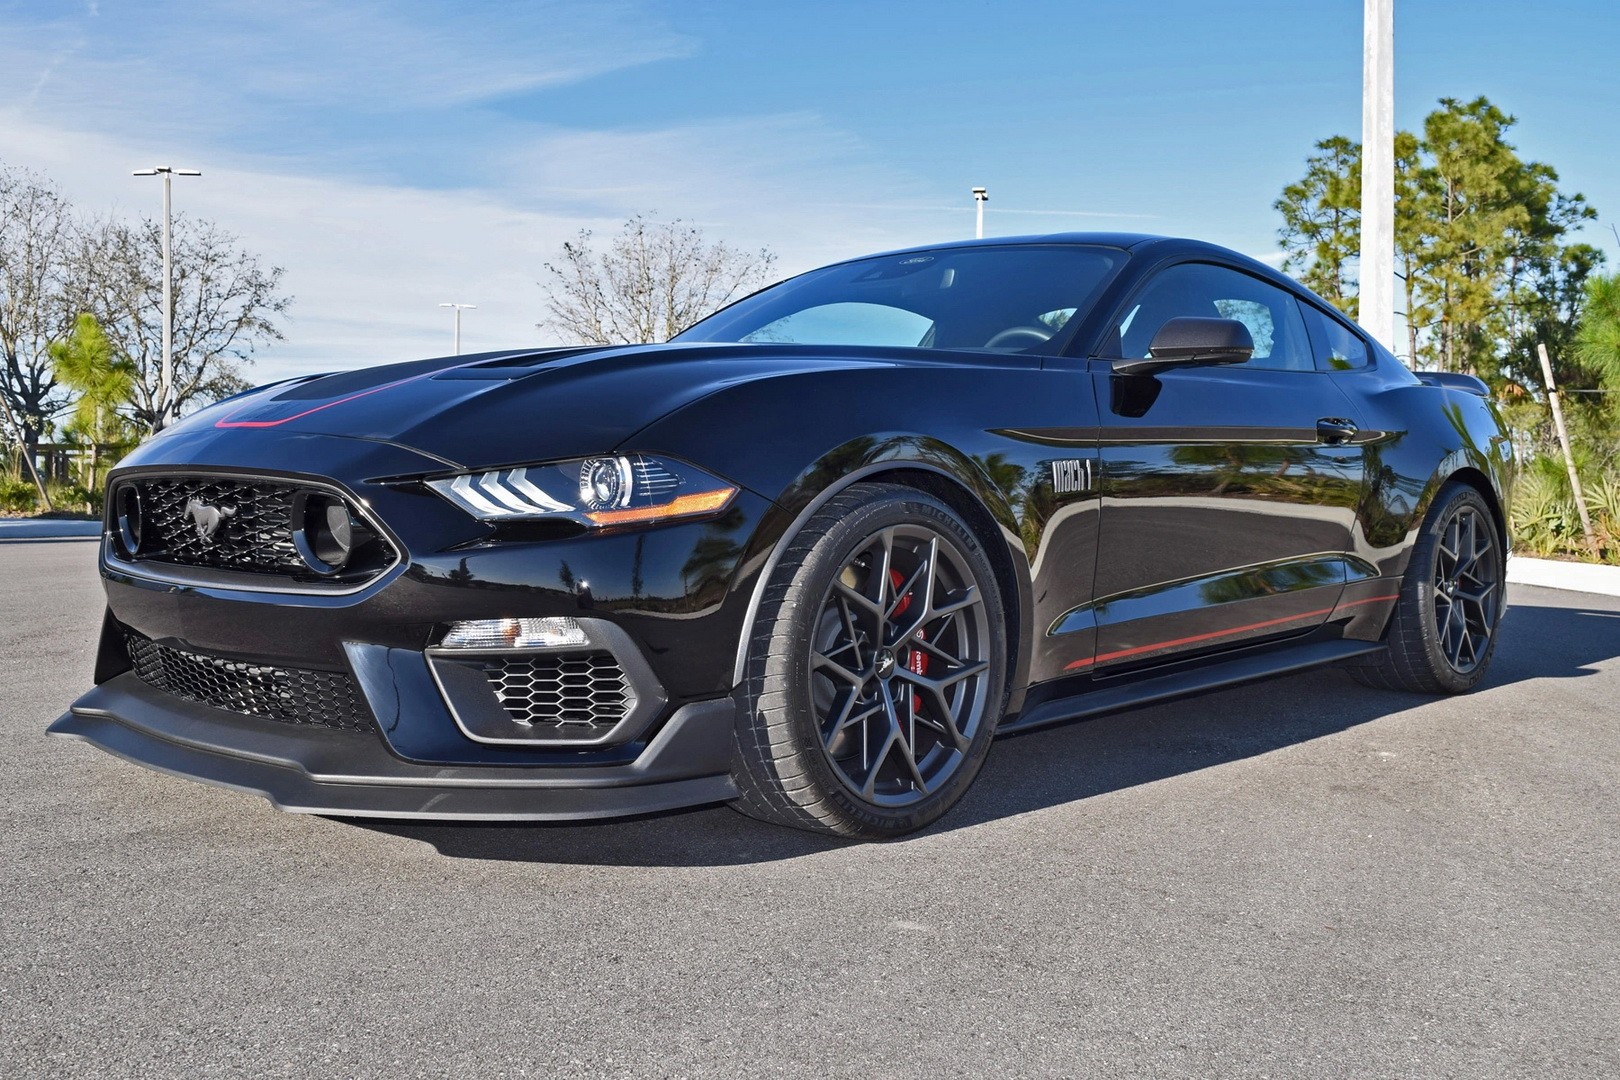 One-Owner 2021 Ford Mustang Mach 1 Has Barely Been Driven, Looks ...